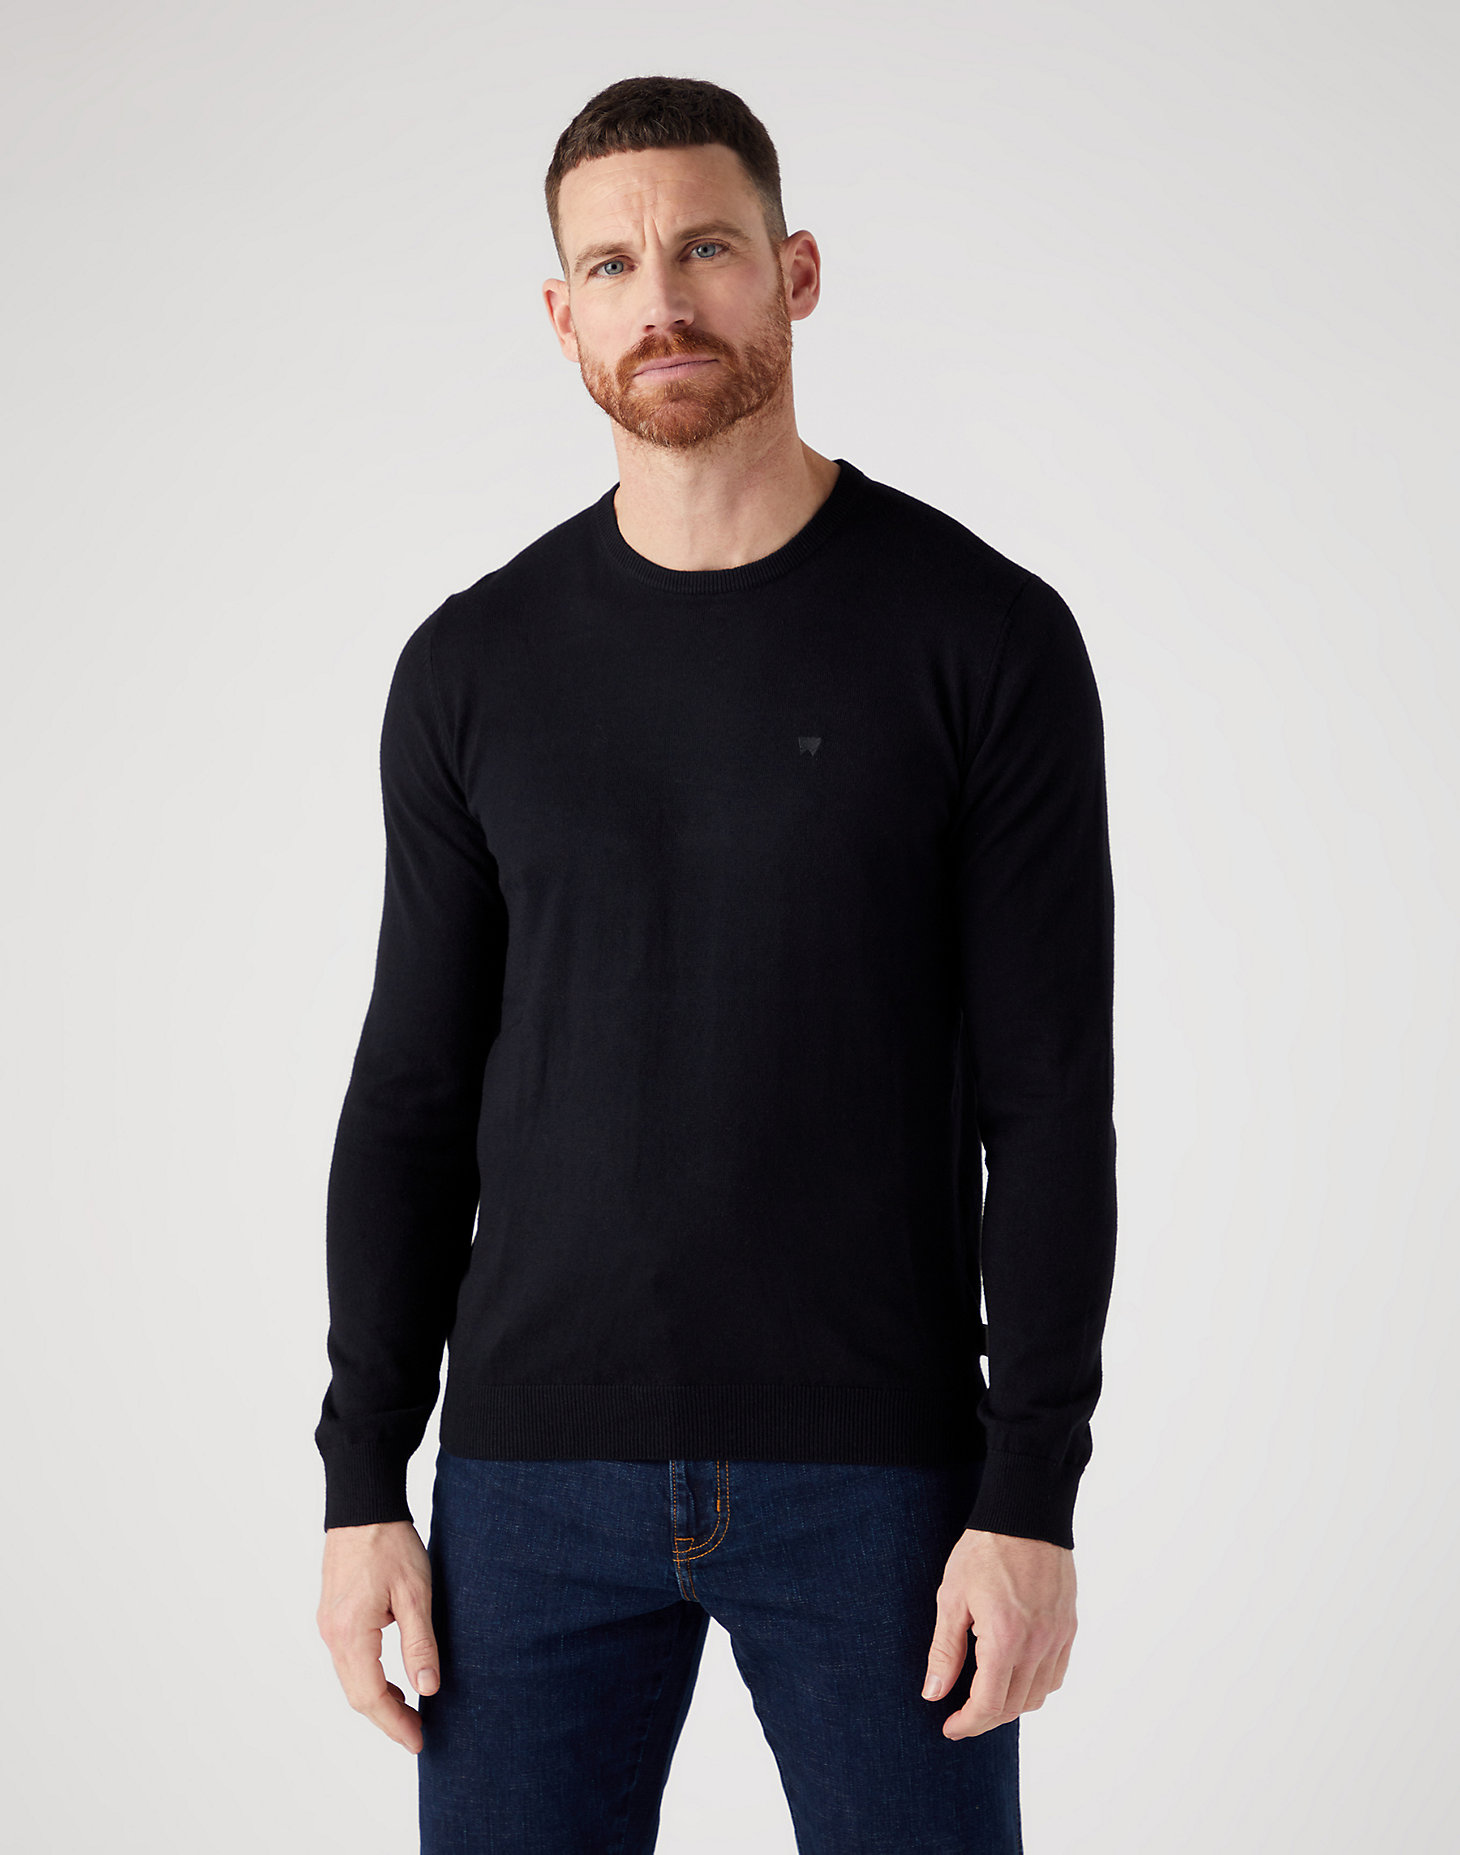 Crewneck Knit in Real Black main view